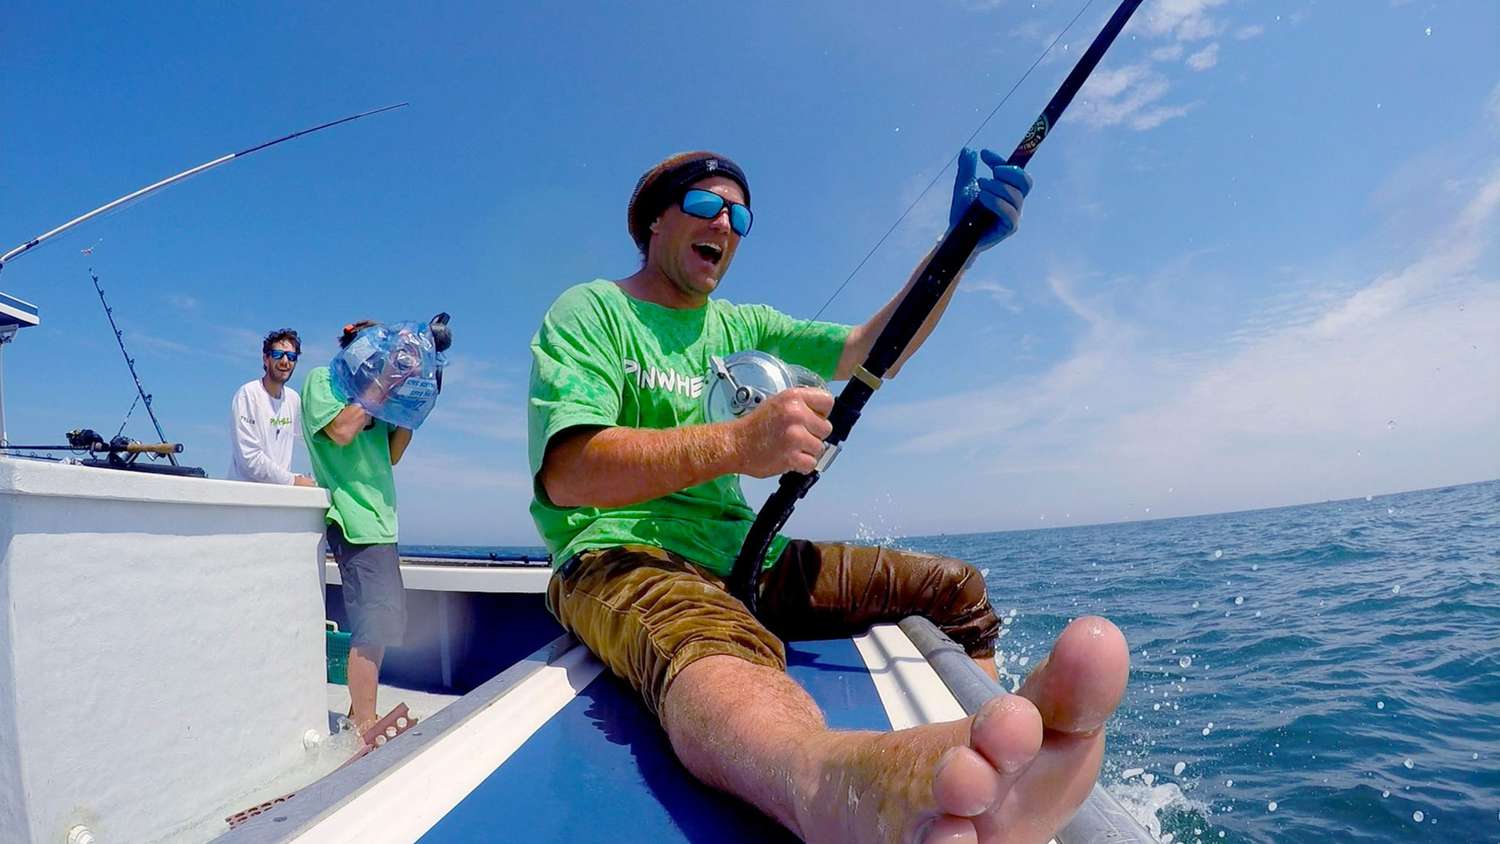 <p>Nicholas "Duffy" Fudge, a cast member on National Geographic Channel's Wicked Tuna, has died. He was 28. The series announced the sad news alongside a photo of Fudge in a tweet on its official Twitter account July 22.</p>
                            <p>".@NatGeoChannel and @Pilgrim_Studios were saddened to learn thatWicked Tuna cast member Nicholas 'Duffy' Fudge passed away this week," the statement reads.</p>
                            